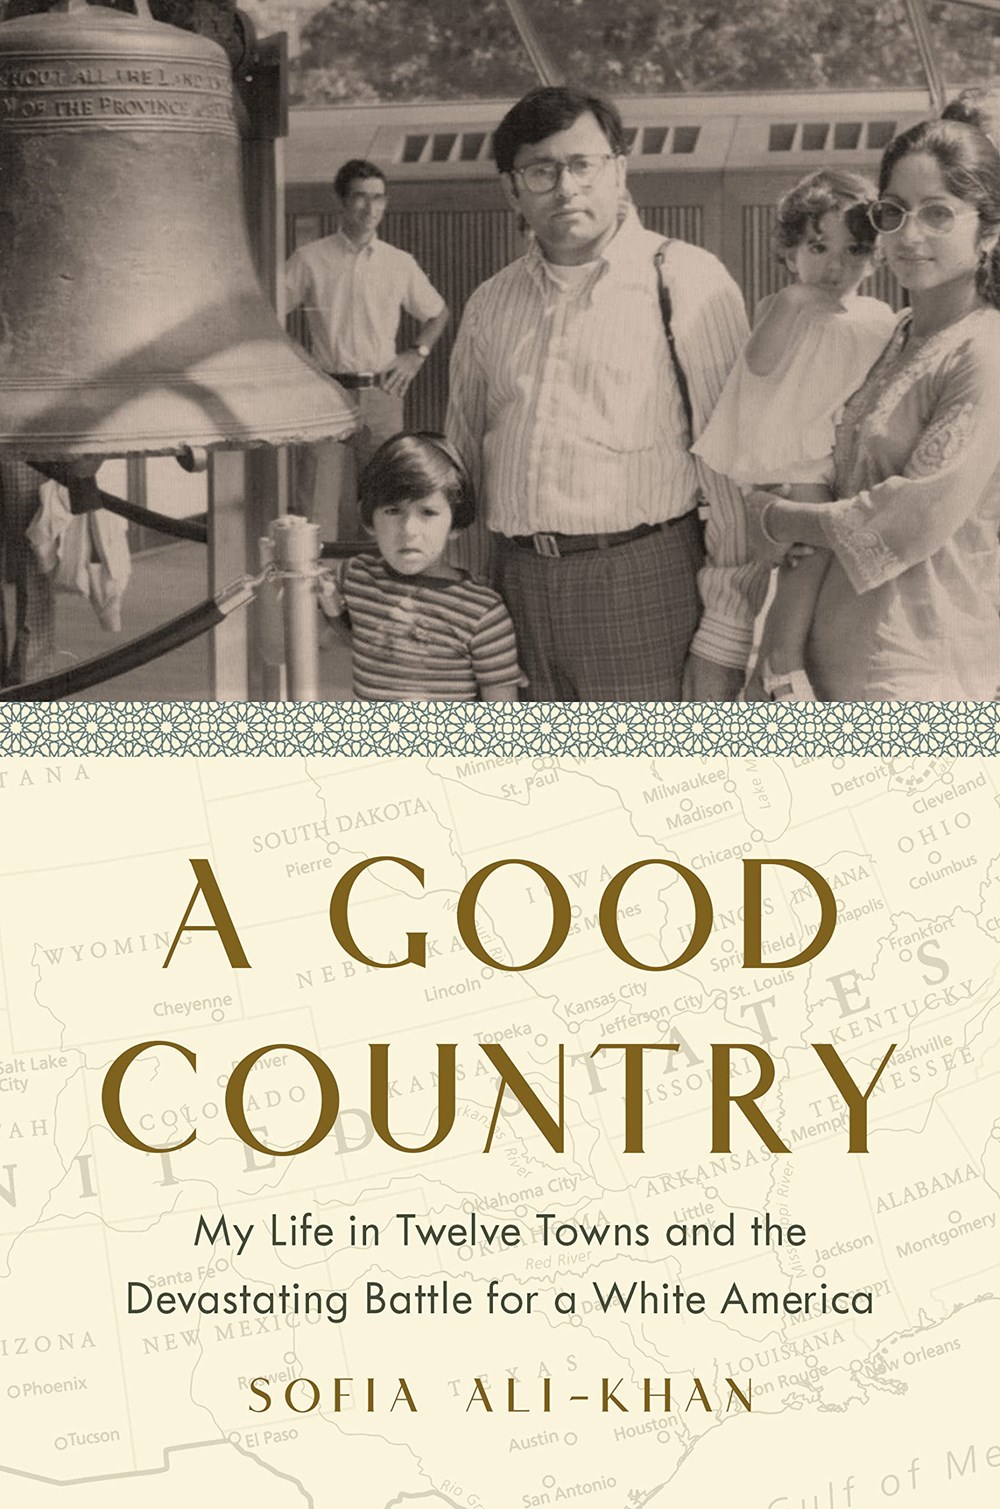 Good Country: My Life in Twelve Towns and the Devastating Battle for a White America